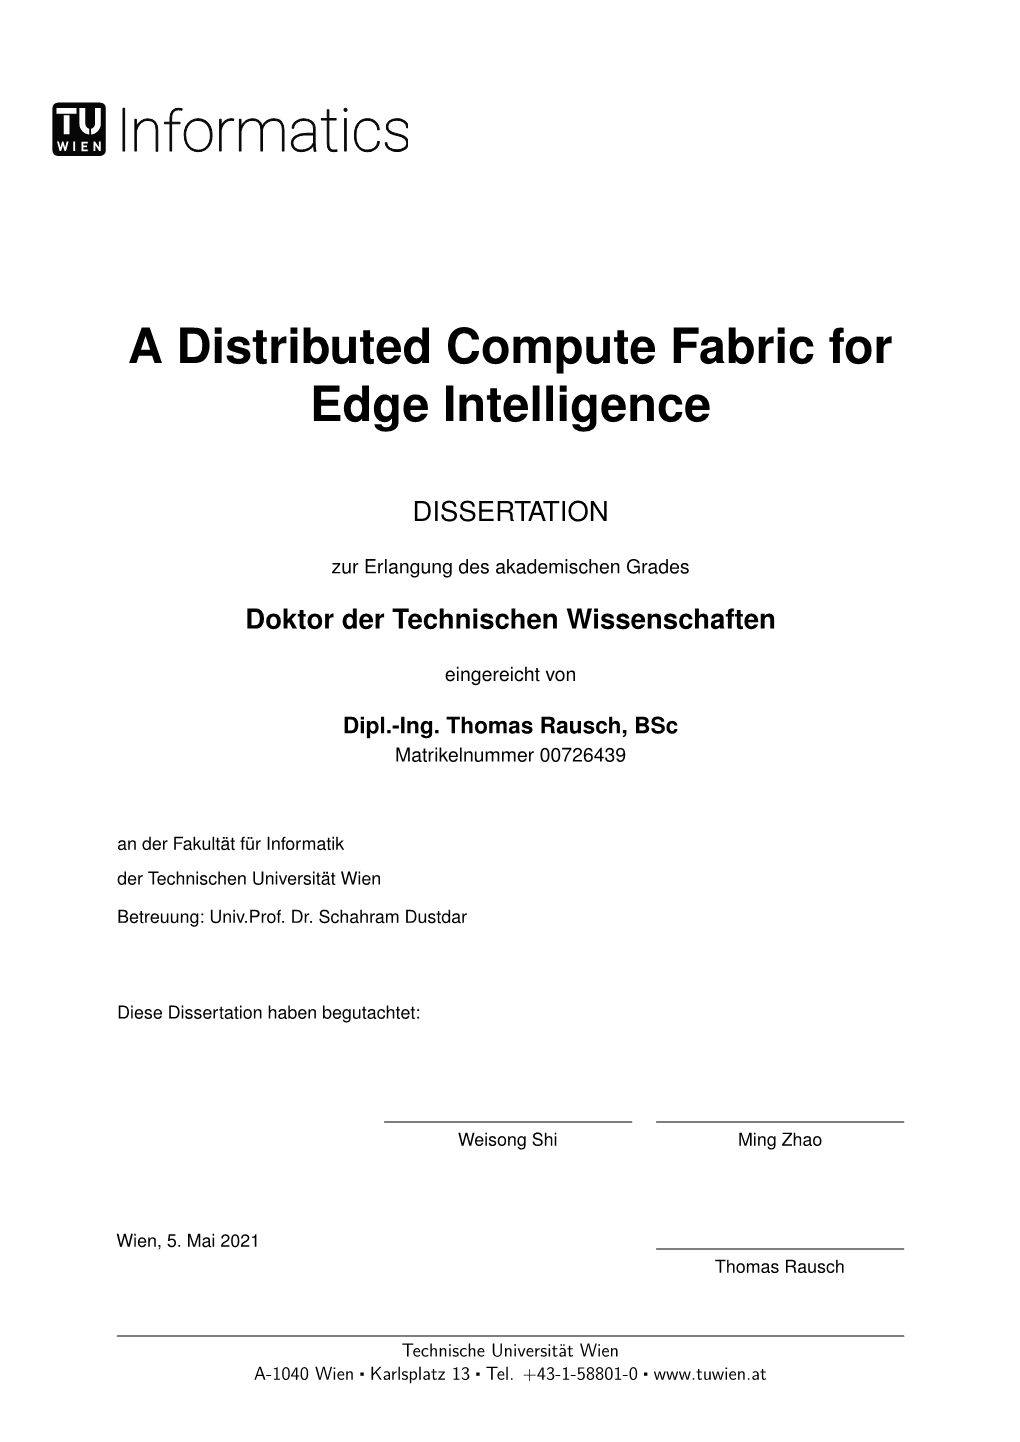 A Distributed Compute Fabric for Edge Intelligence